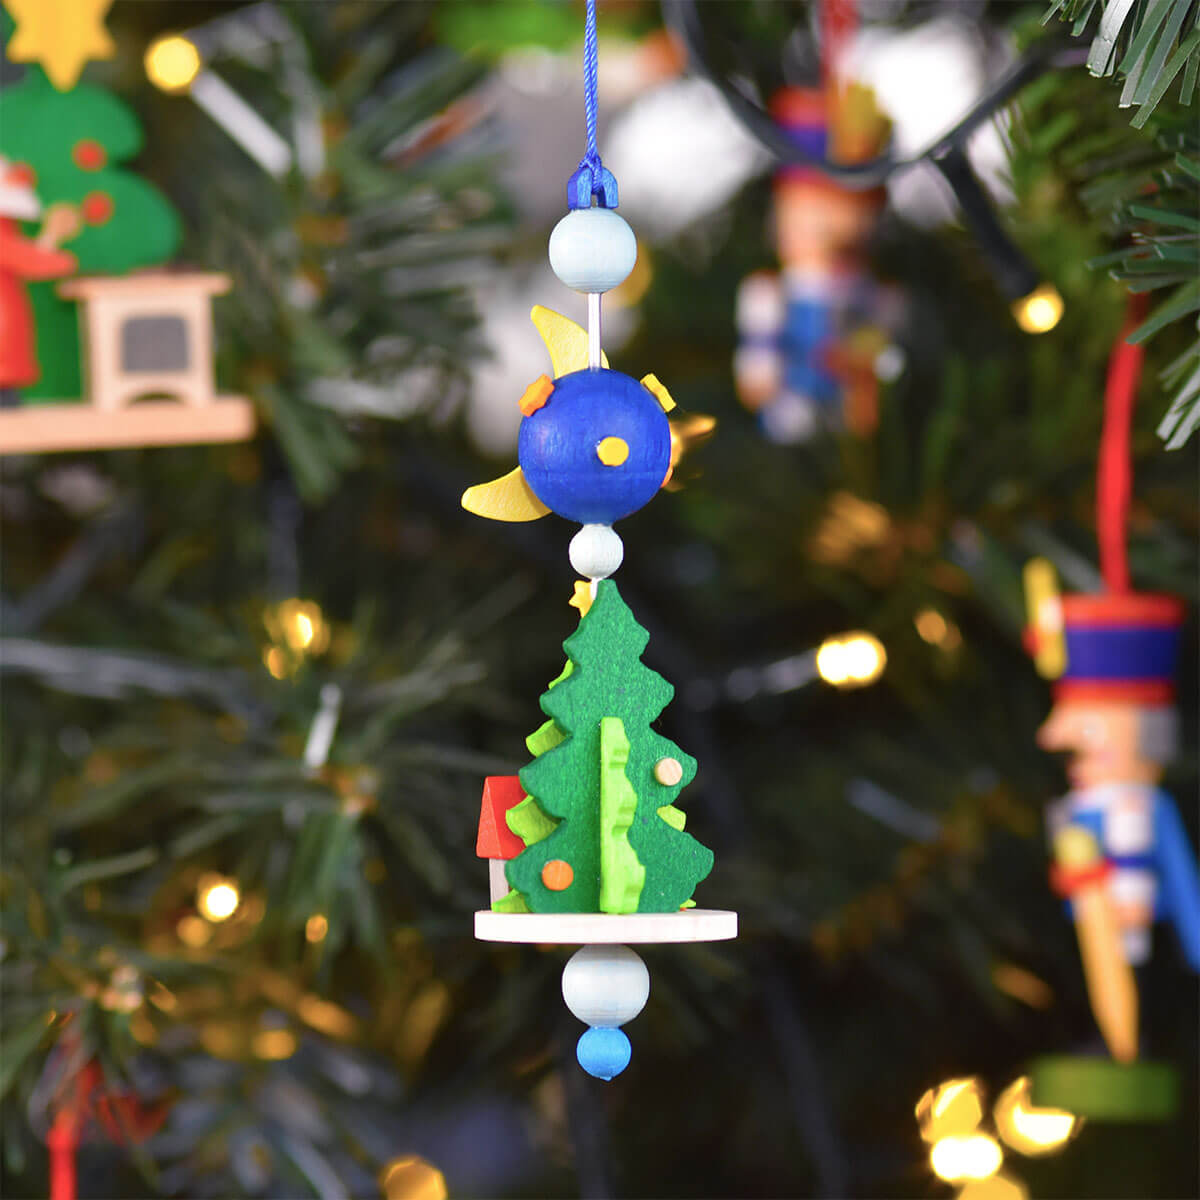 Spindle Ornament with houses